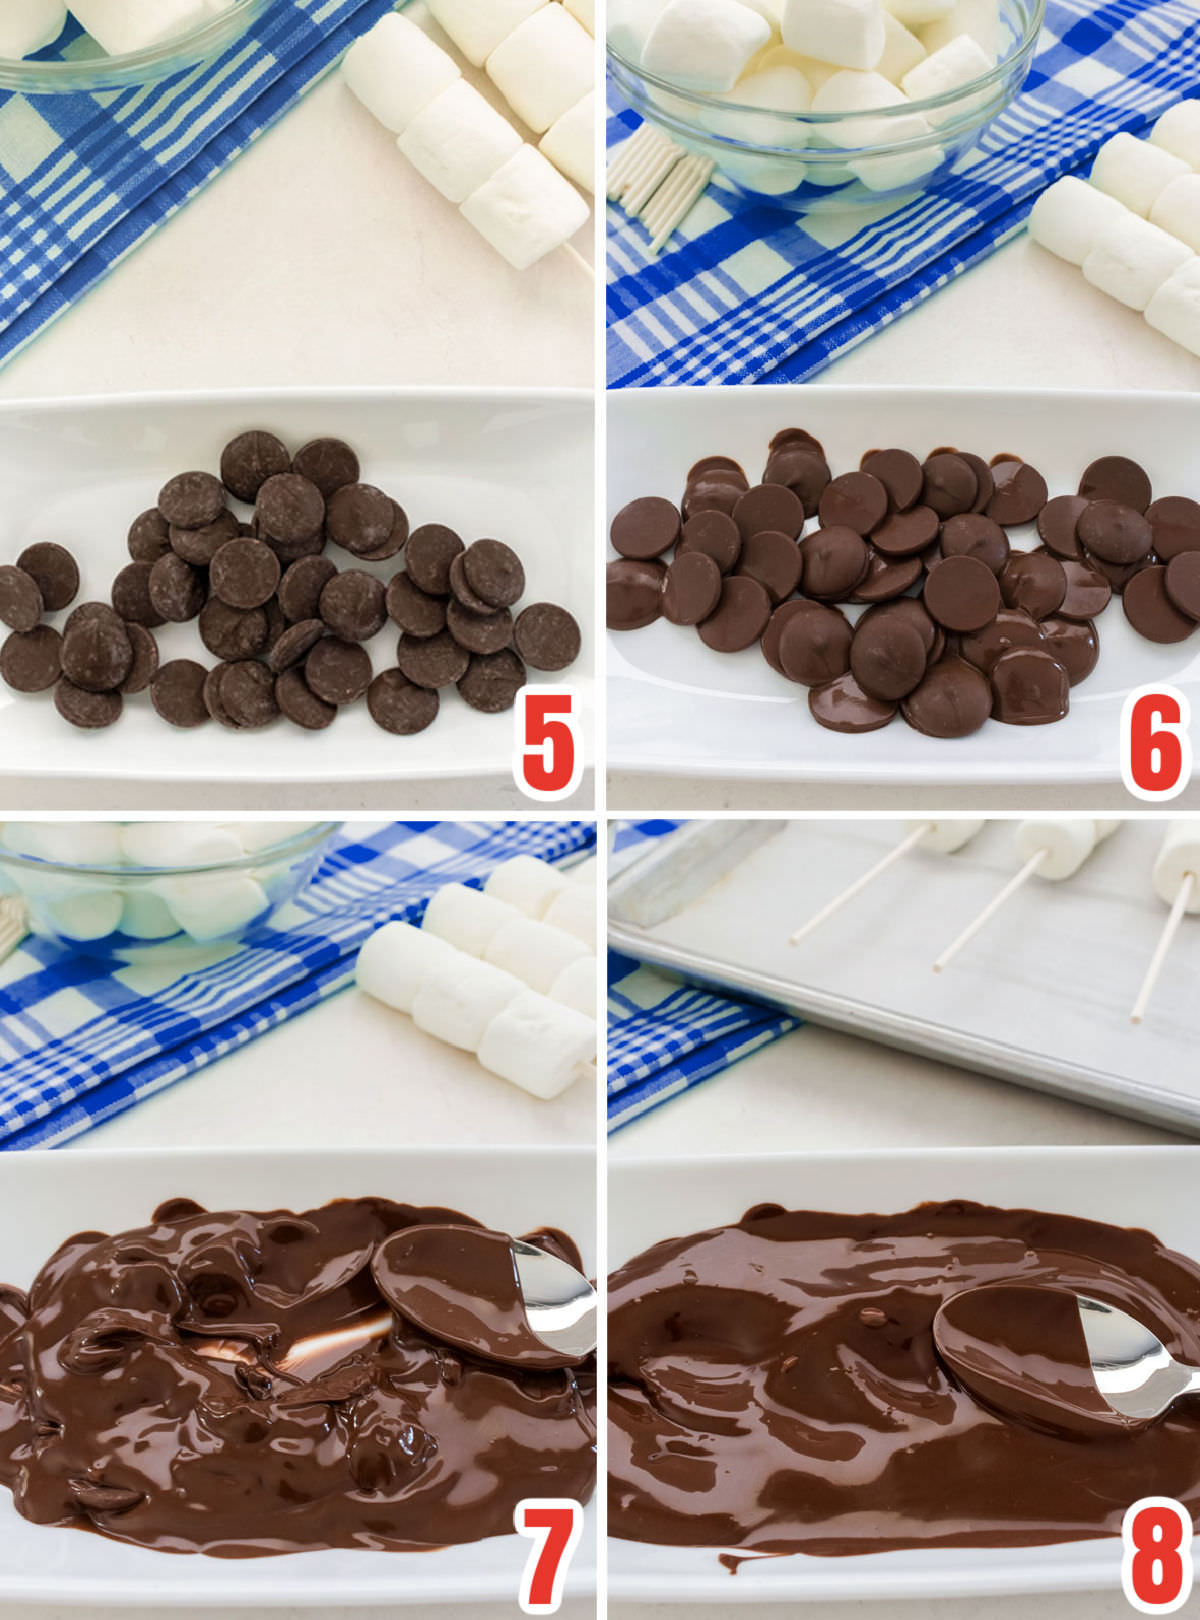 Collage image showing the steps required to melt the chocolate so you can cover the marshmallow pop.